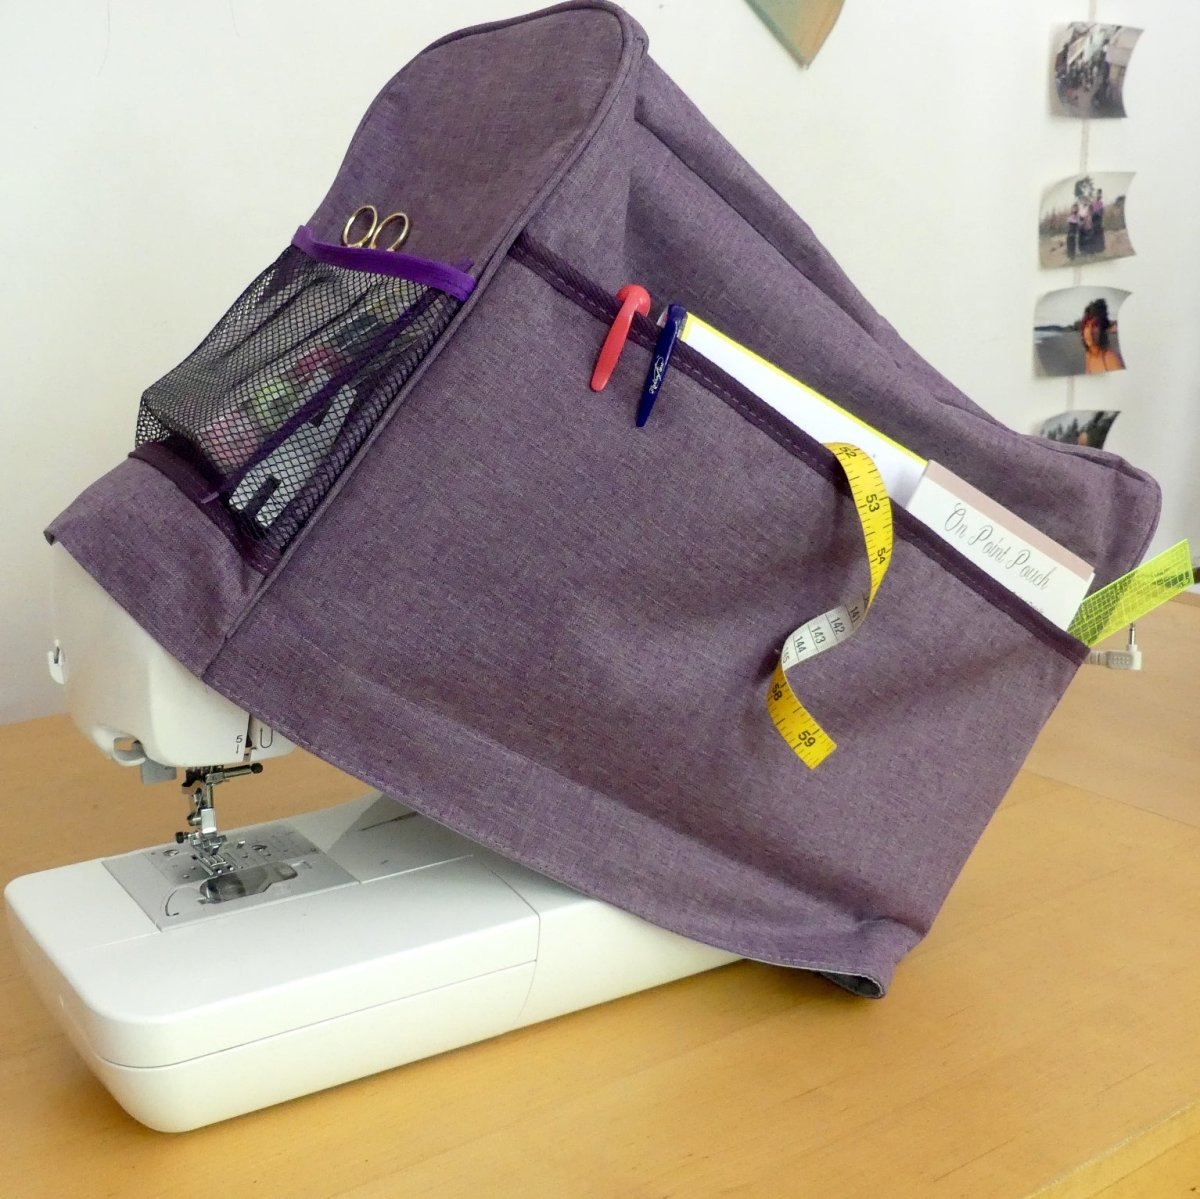 Purple Sewing Machine Cover on a sewing machine